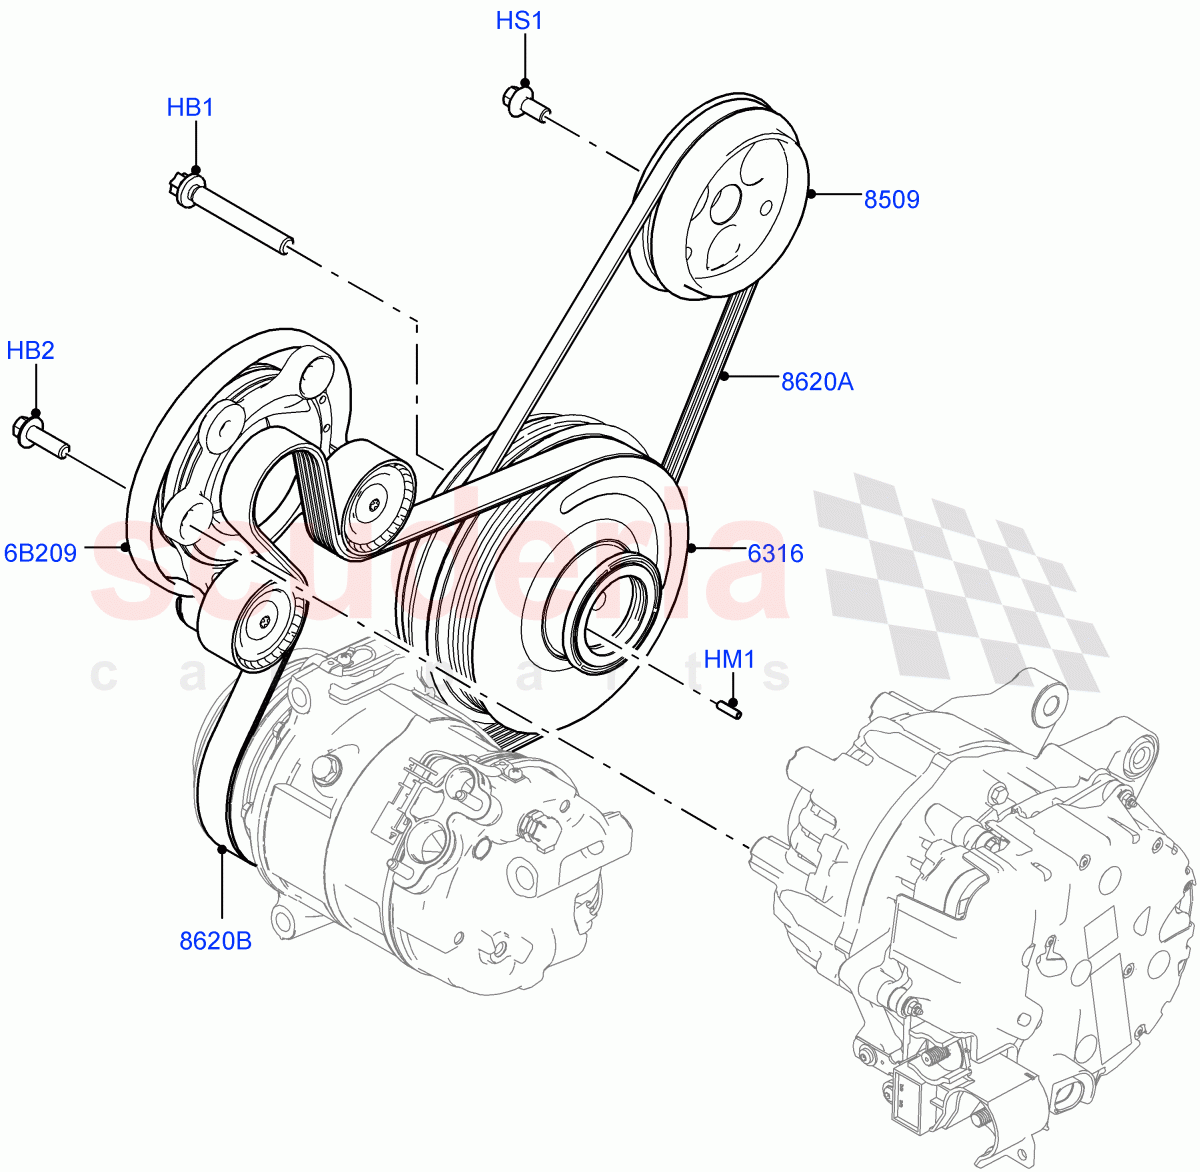 Pulleys And Drive Belts(2.0L AJ20P4 Petrol Mid PTA,Changsu (China),Electric Engine Battery-MHEV)((V)FROMKG006088) of Land Rover Land Rover Discovery Sport (2015+) [2.0 Turbo Petrol AJ200P]